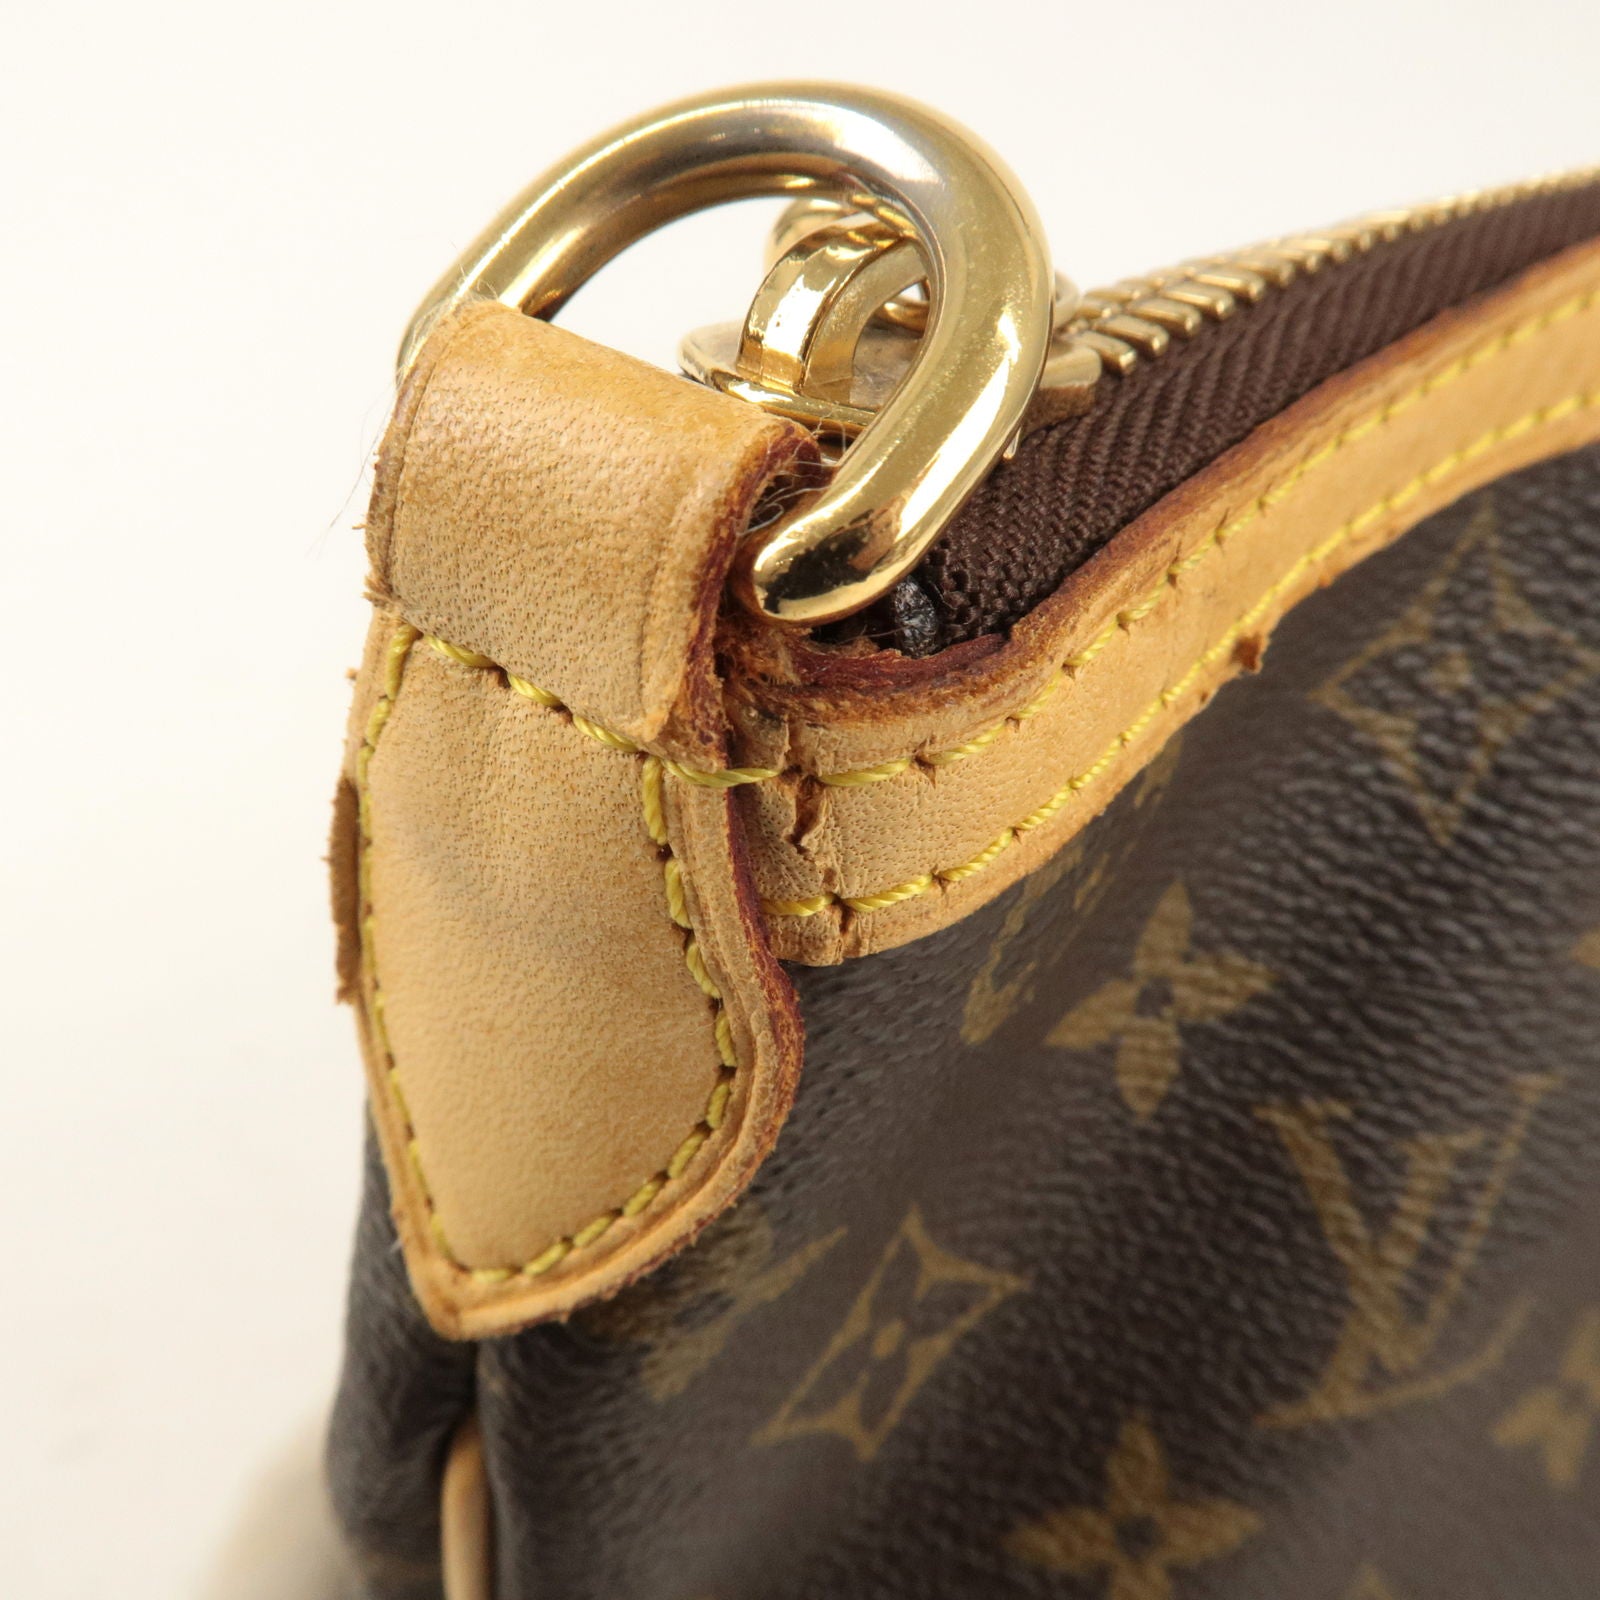 Louis Vuitton Monogram Palermo PM w/ Adjustable Leather Strap and